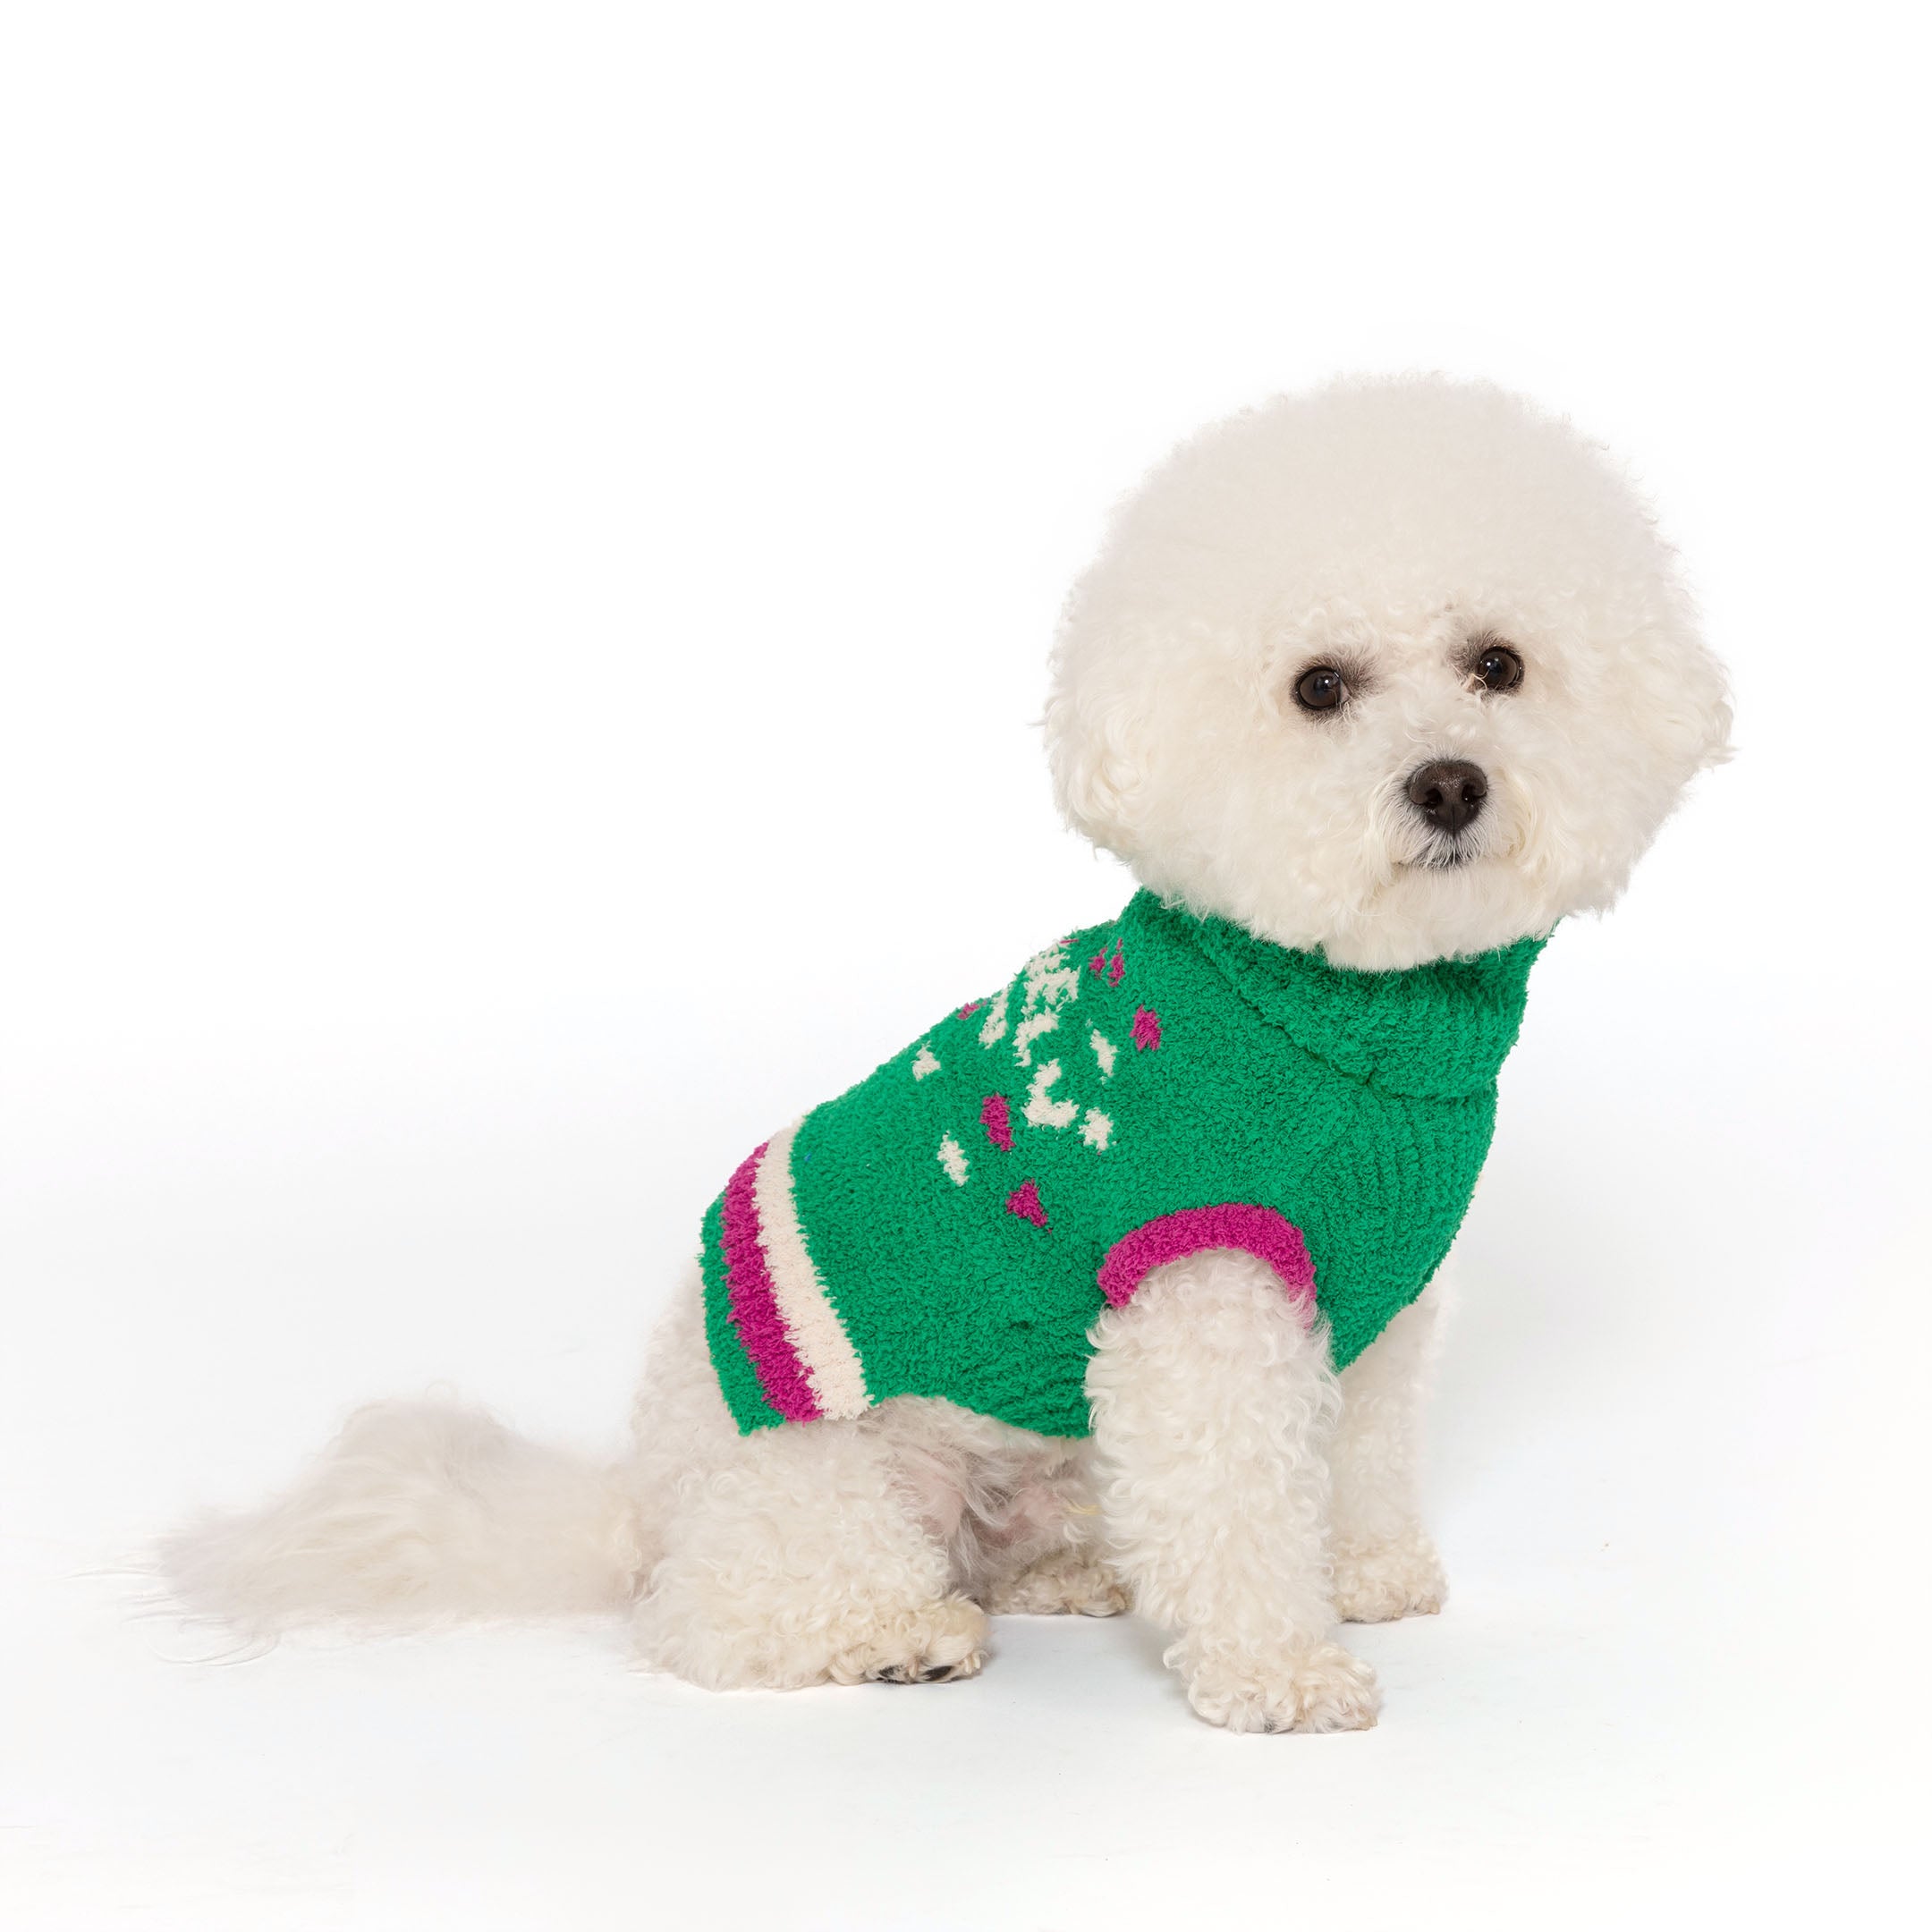 A fluffy white dog poses in a vibrant green knitted sweater with pink and white heart accents and a high collar, looking off-camera with a soft background.